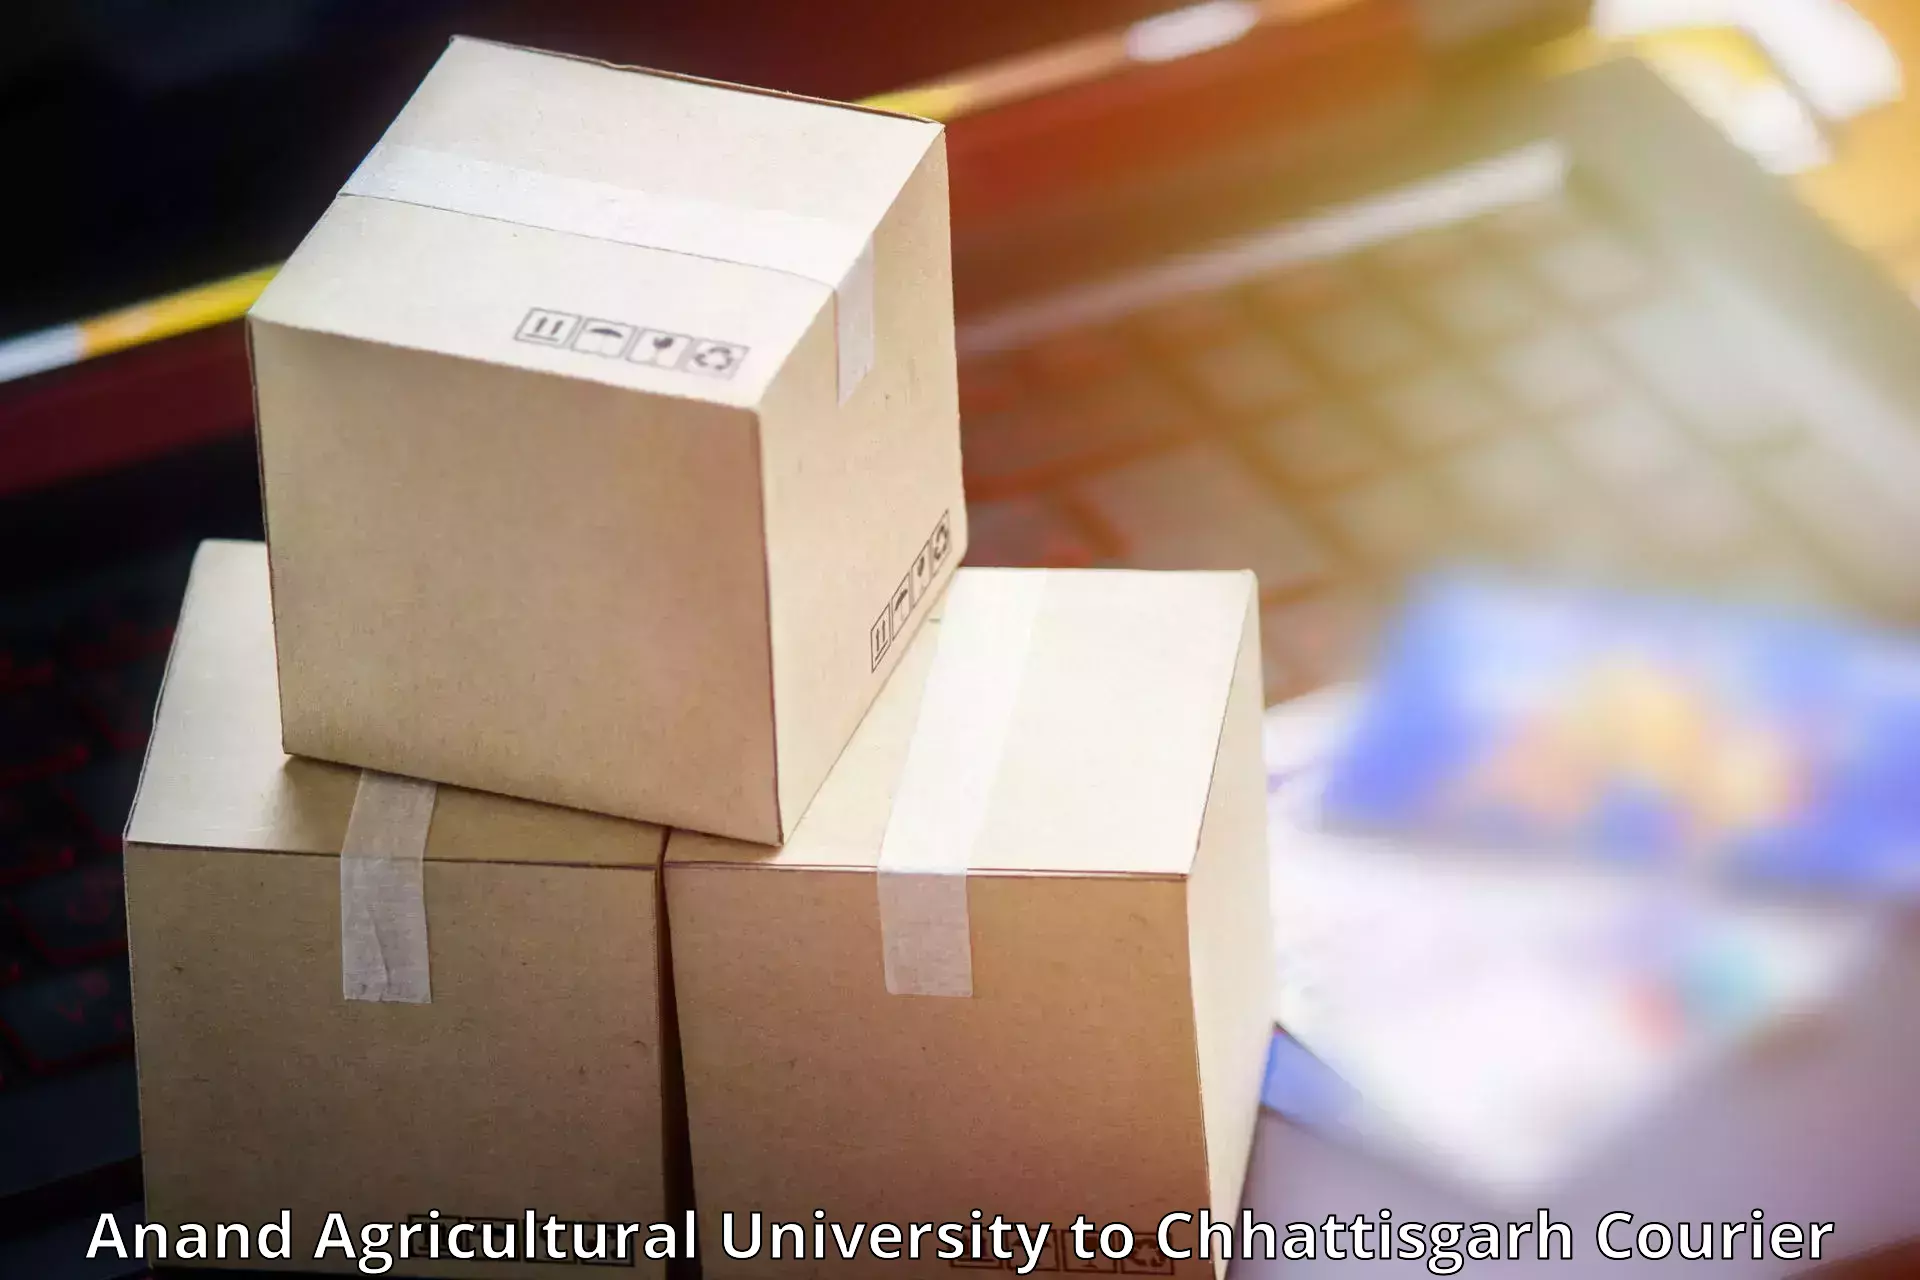 Global courier networks Anand Agricultural University to Kunkuri